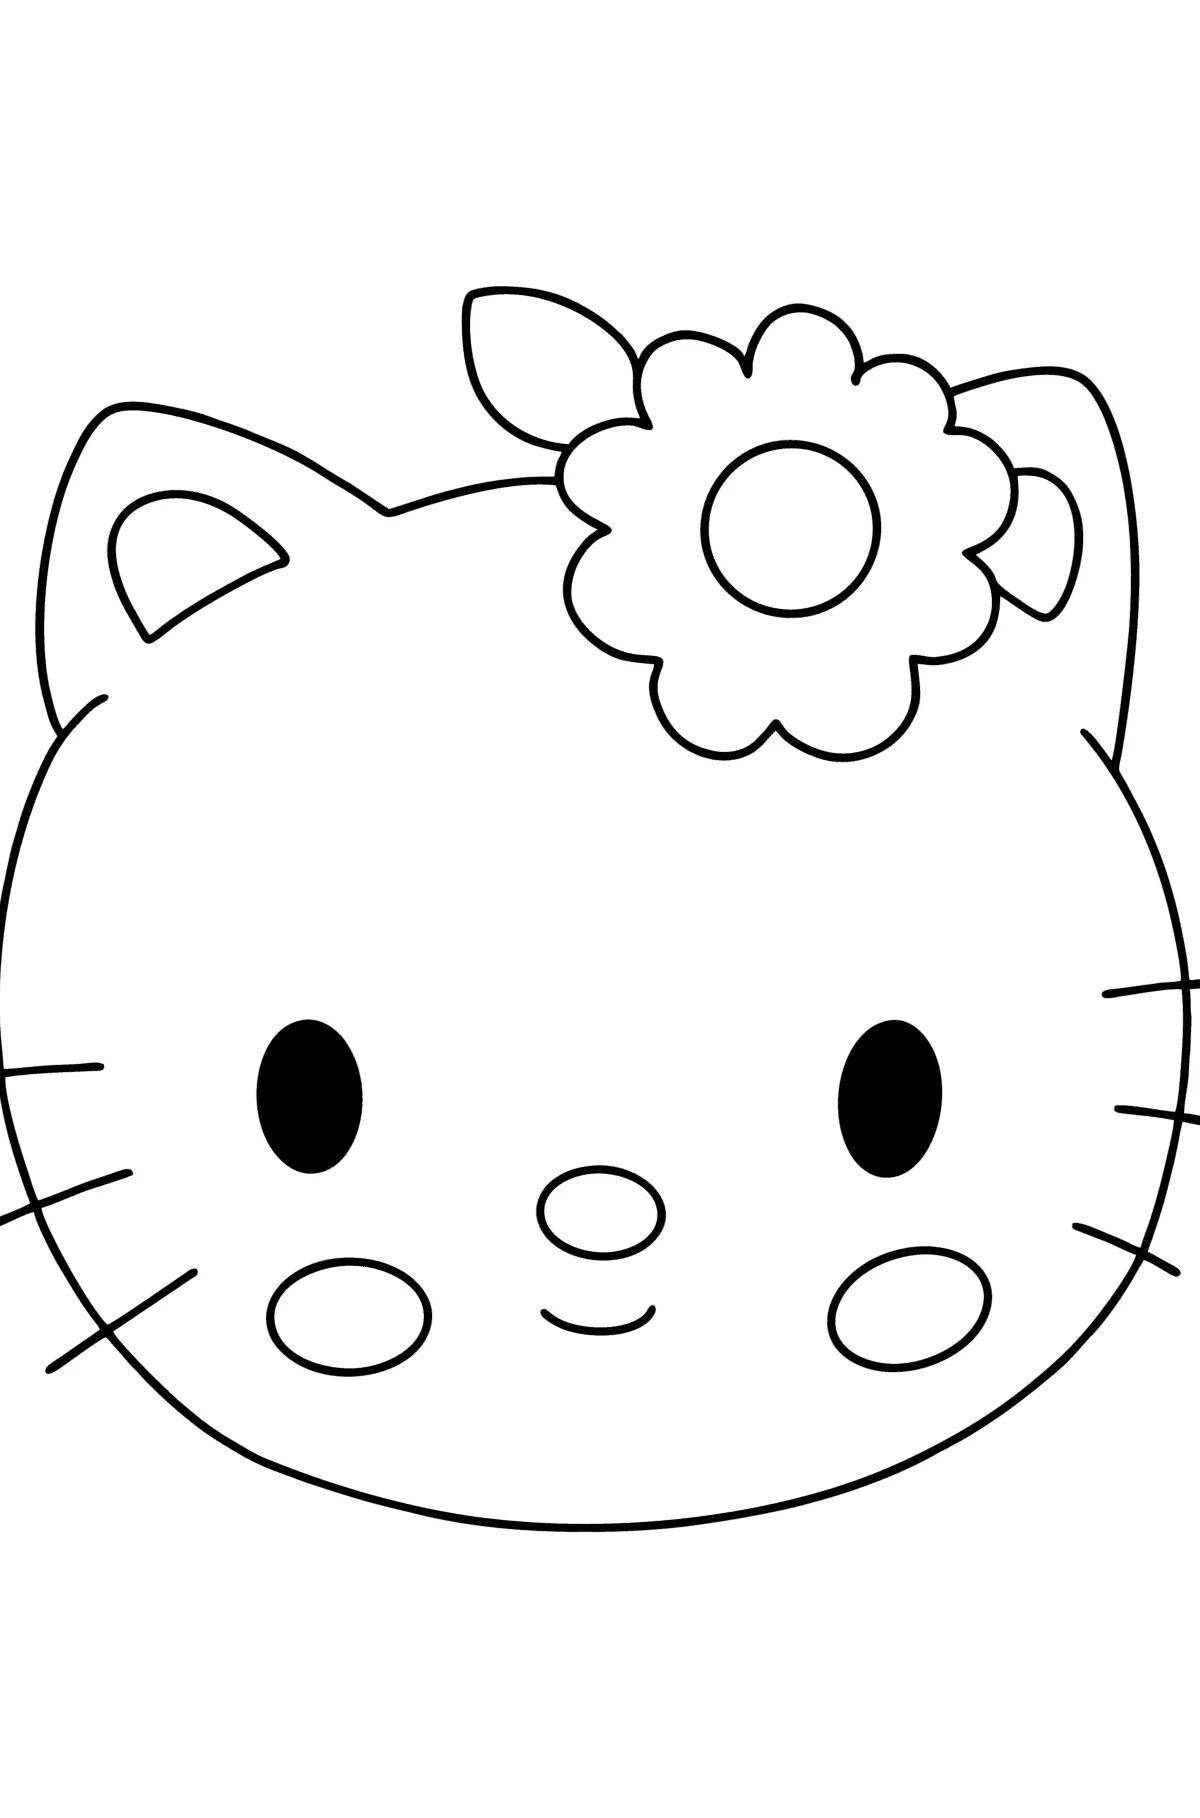 Awesome hello kitty head coloring page